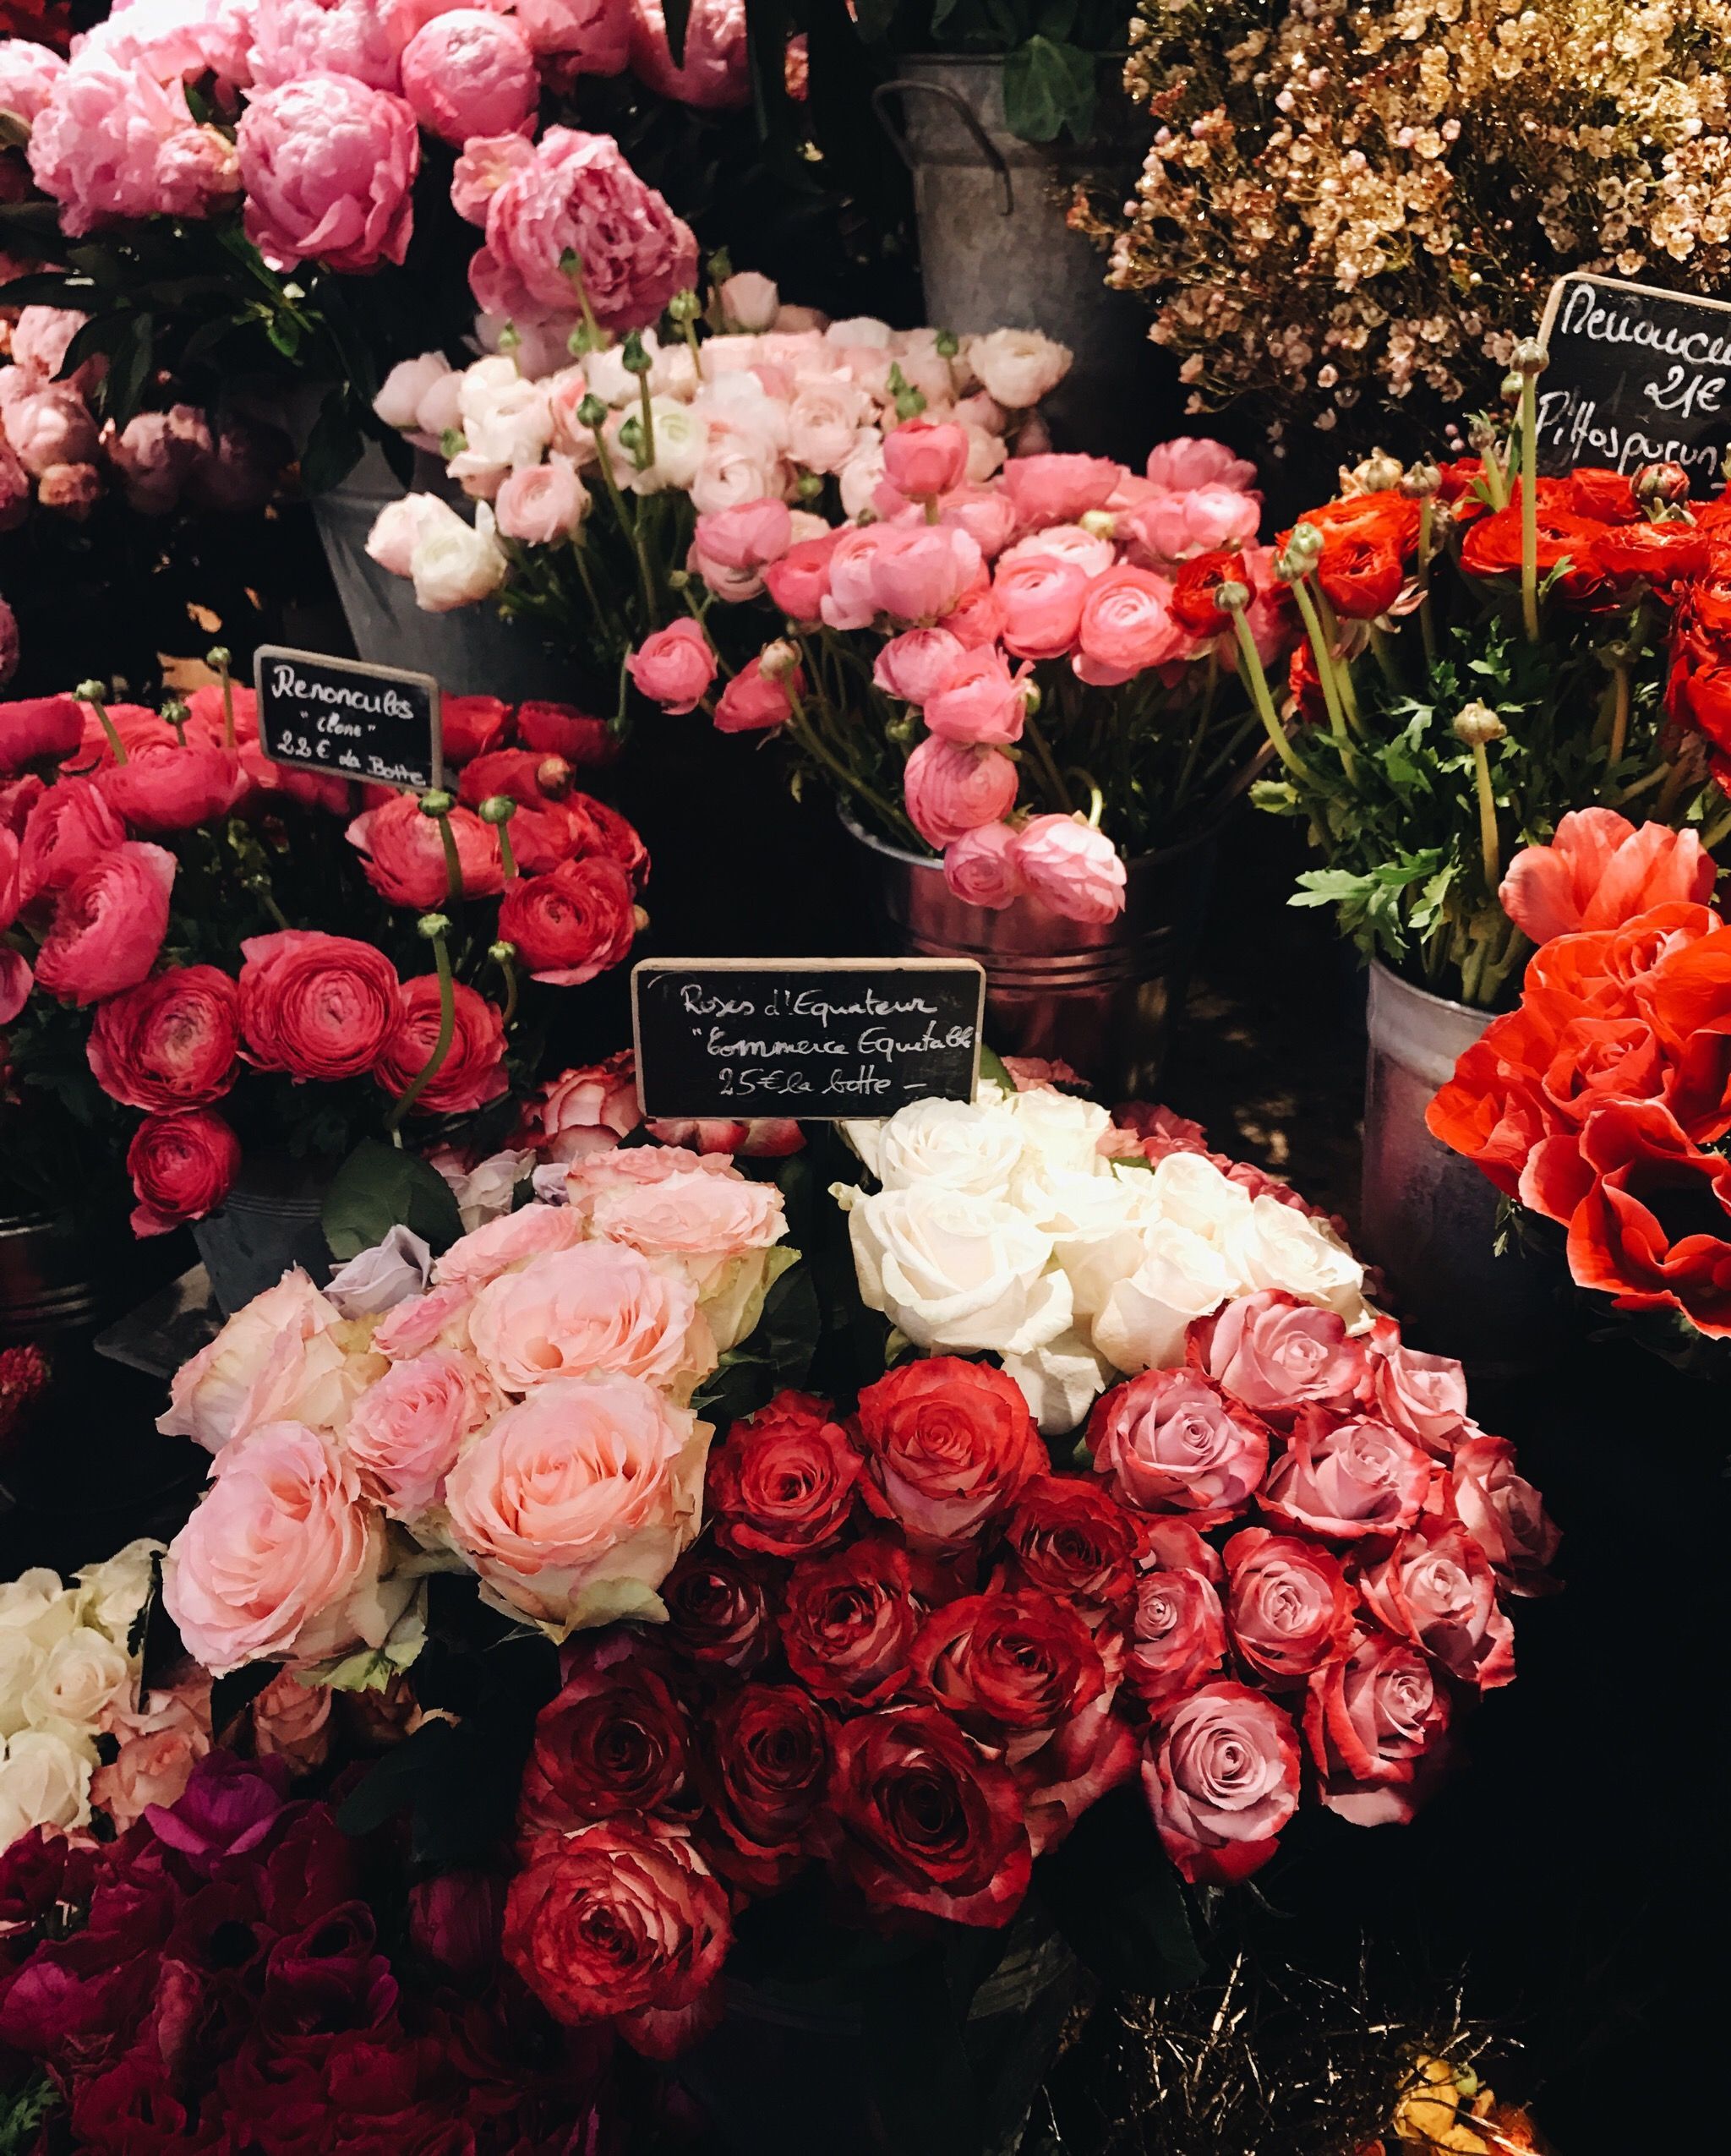 Jessica Whitaker fresh pink and red roses bouquets at a flower shop in Paris, France. Flower aesthetic, Pretty flowers, Flower iphone wallpaper